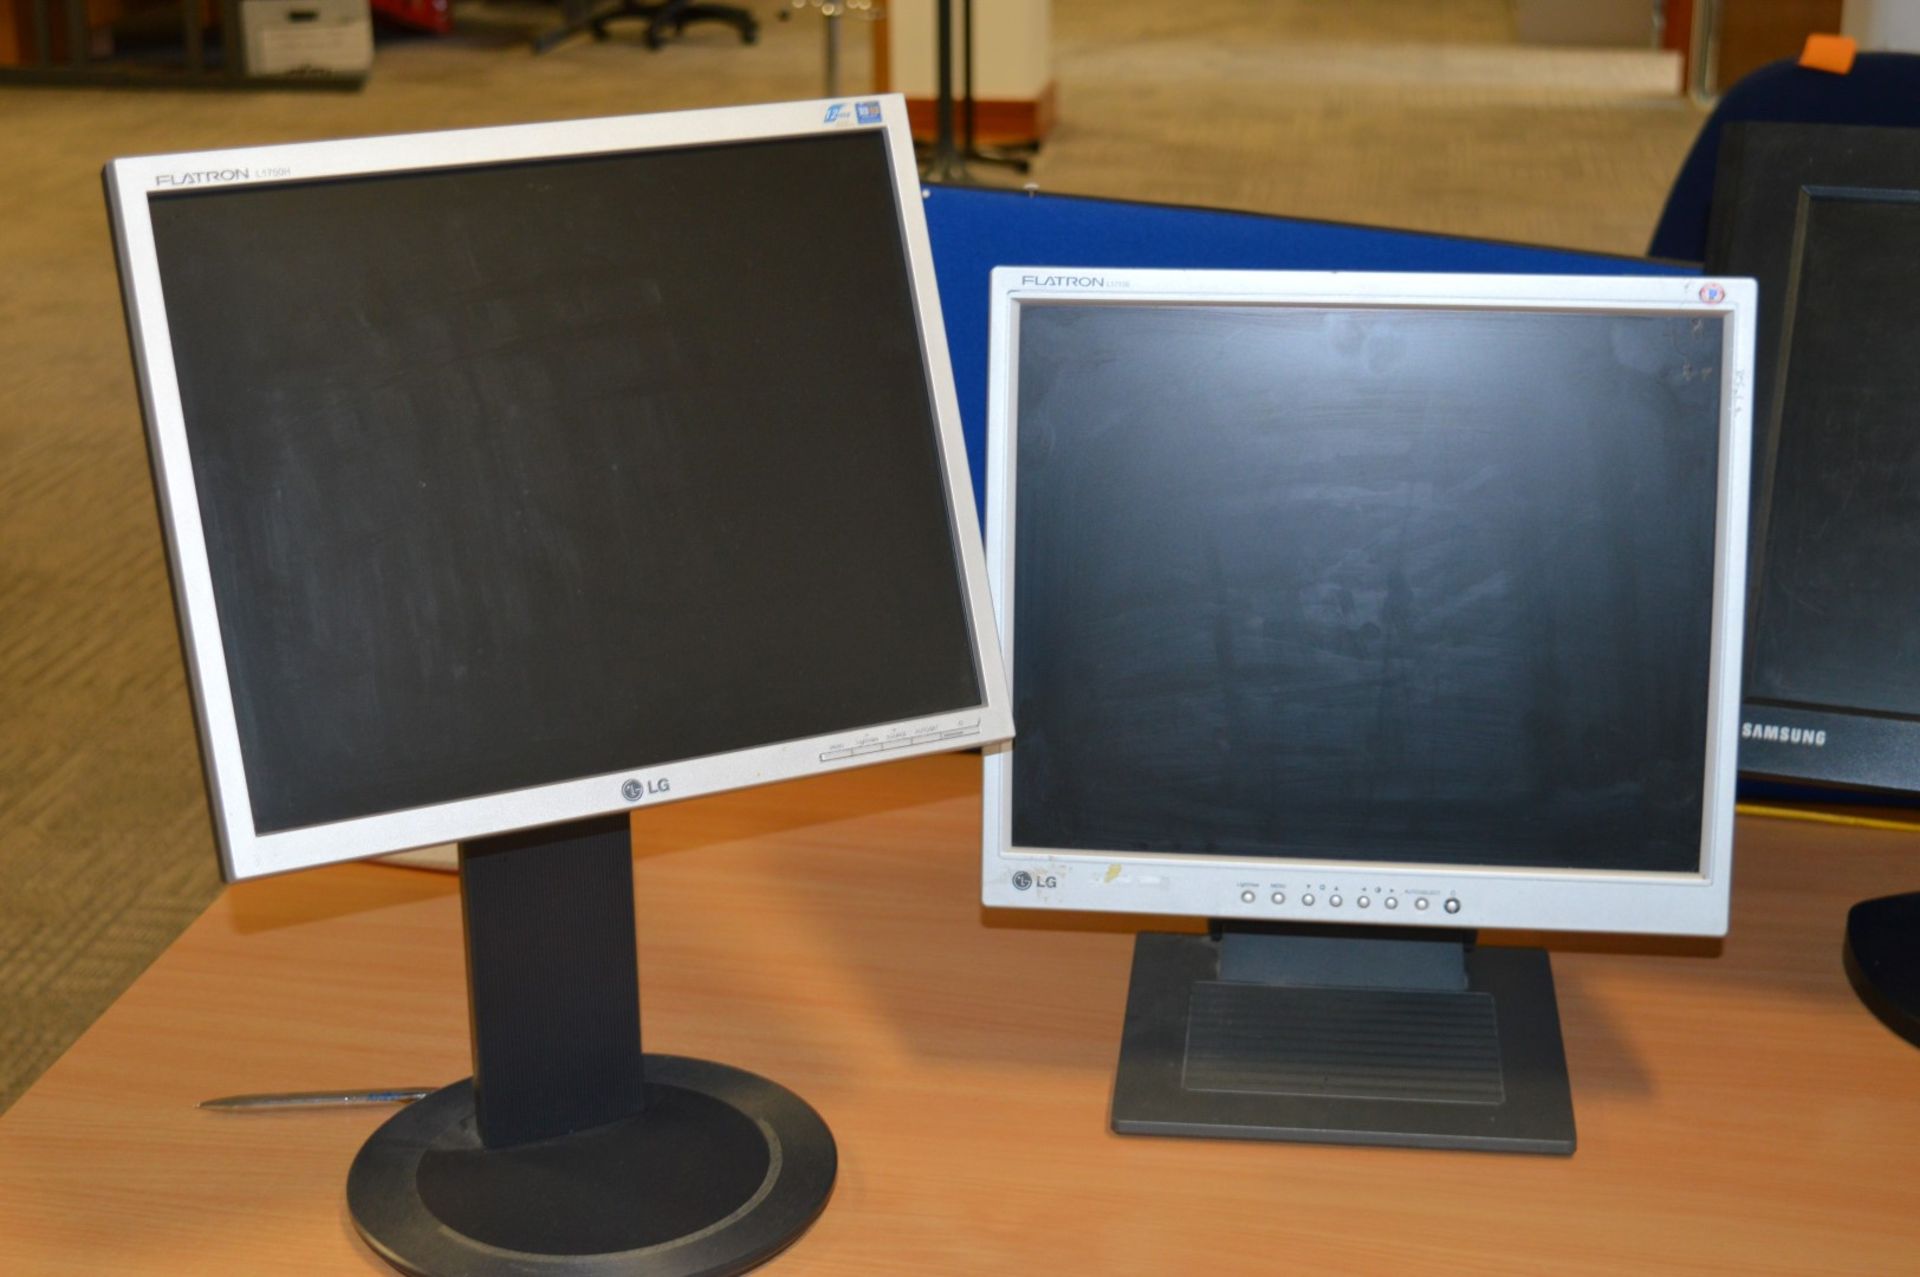 4 x Flat Screen TFT Computer Monitors - LG and Samsung Branded - Models Include L1710B, L1710s, - Image 2 of 7